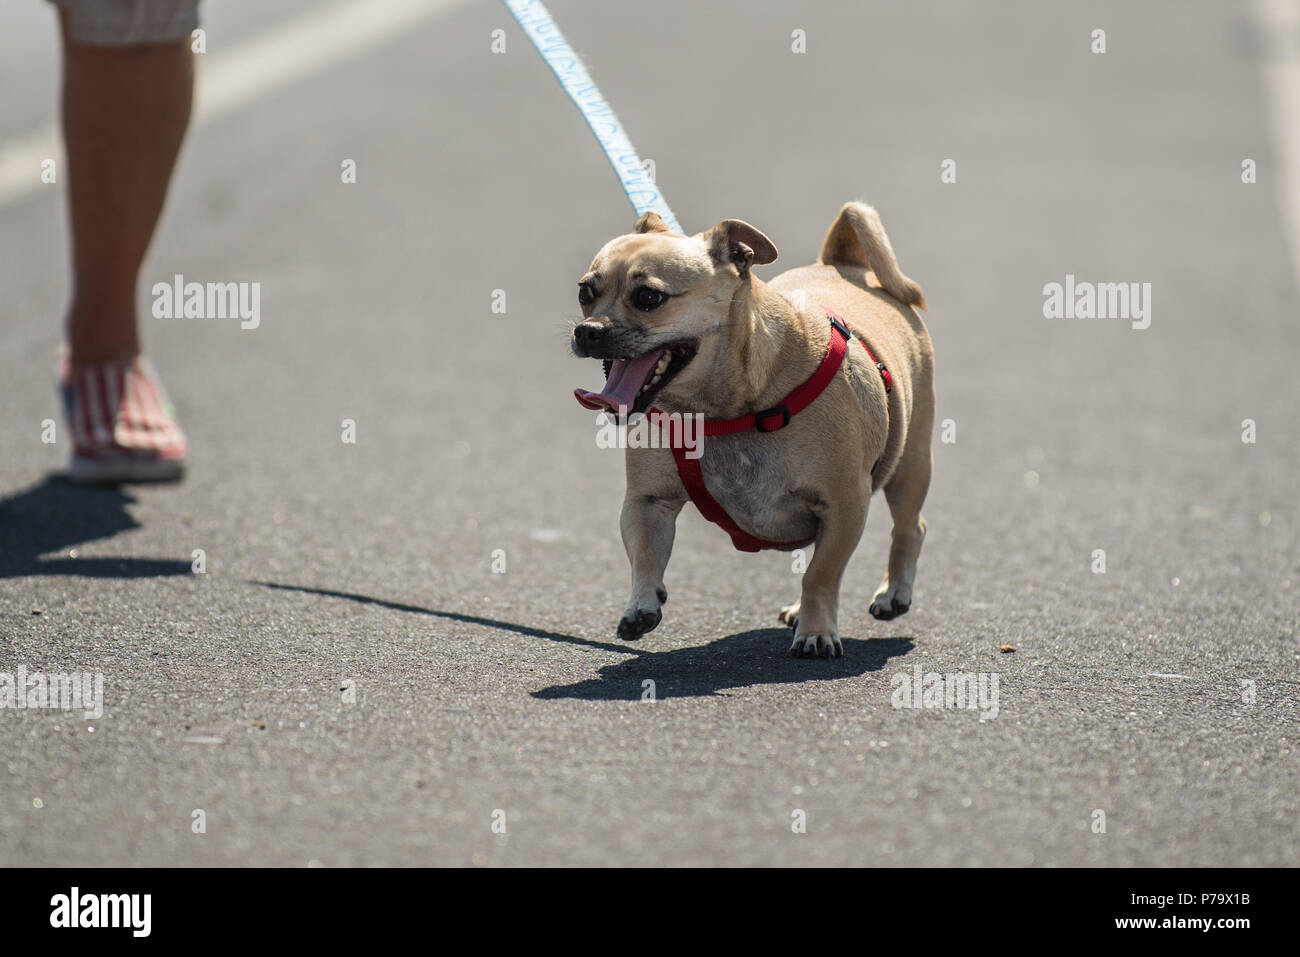 Mixed breed small adorable dog walking along city street route on harness with eagerness. Stock Photo